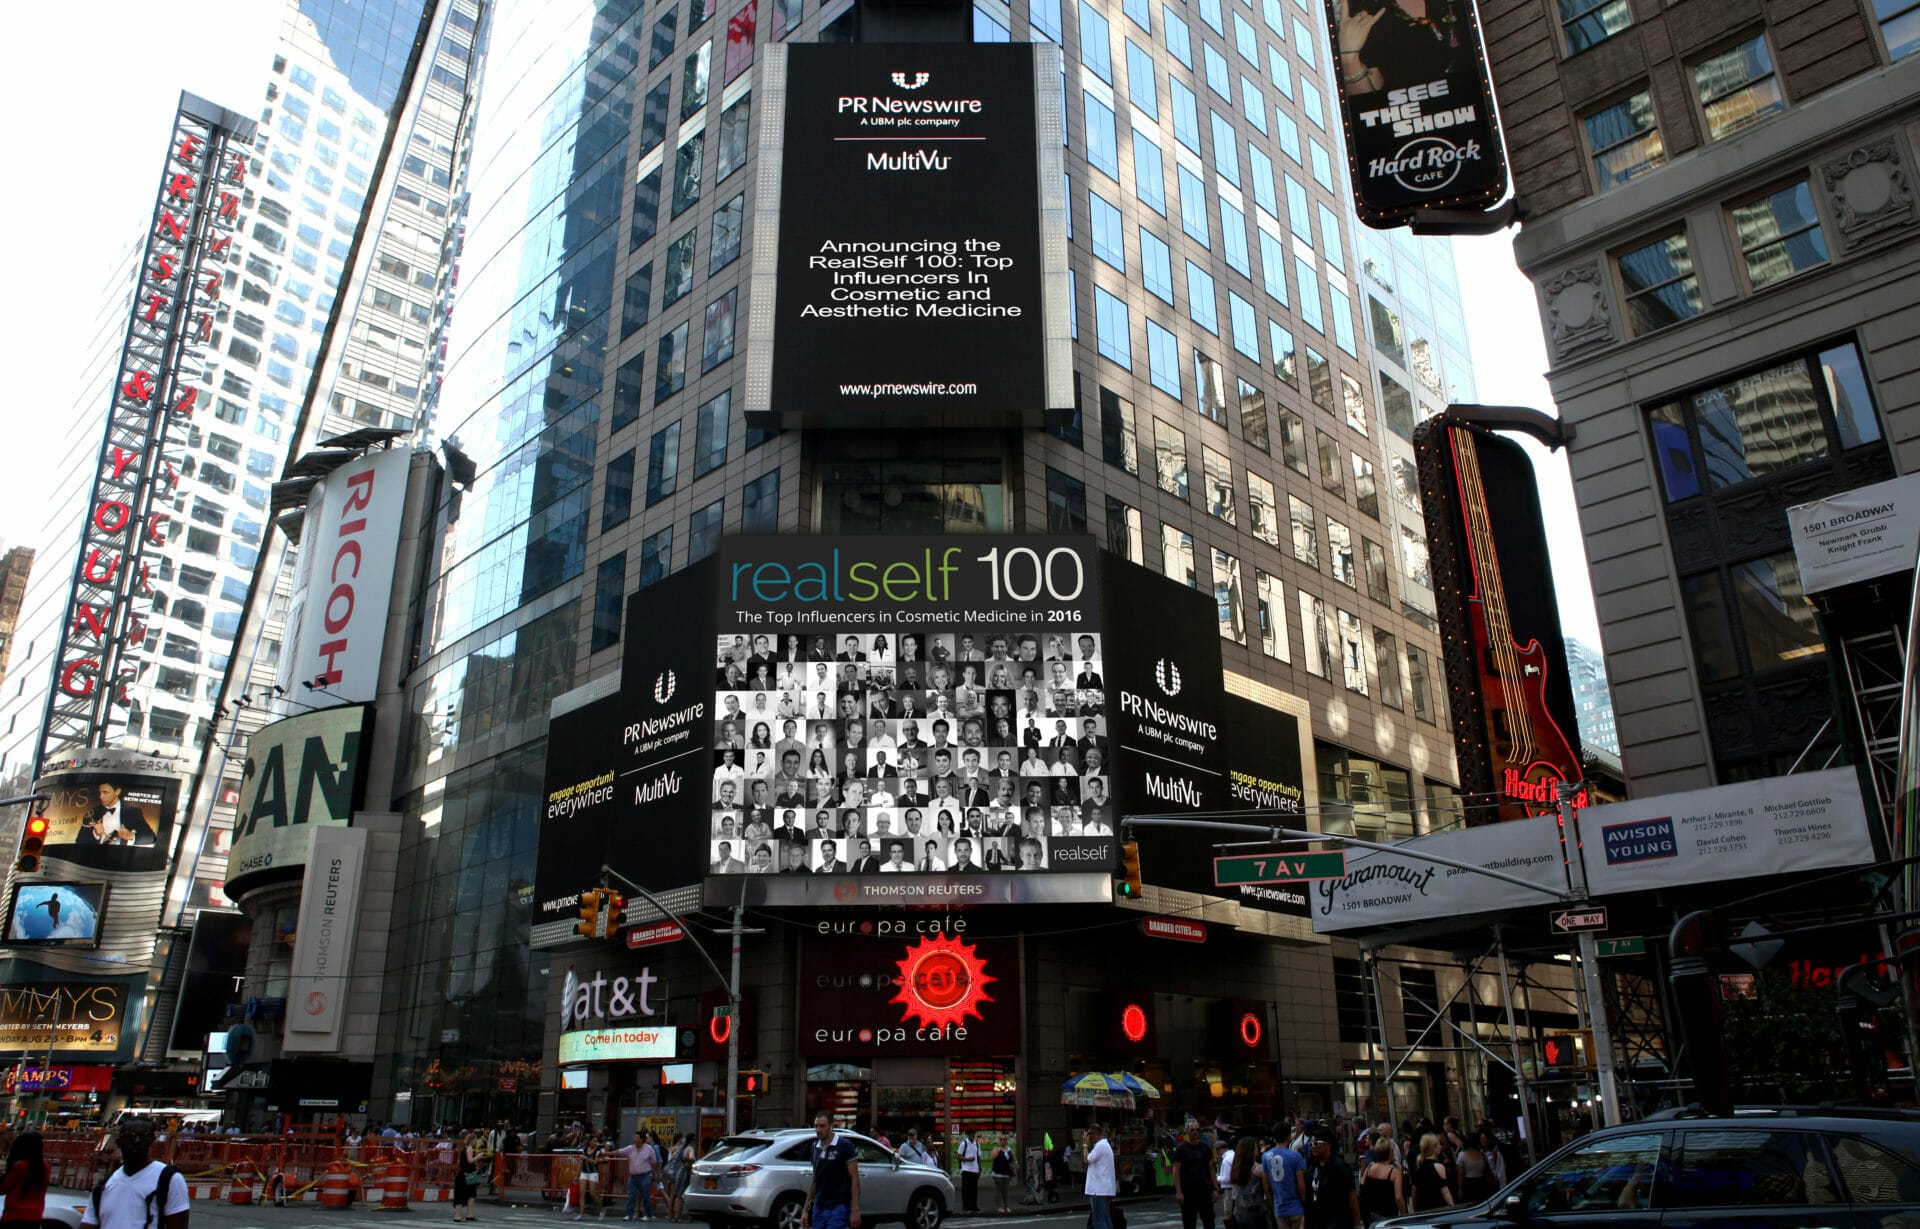 RealSelf100 in Times Square, New York City